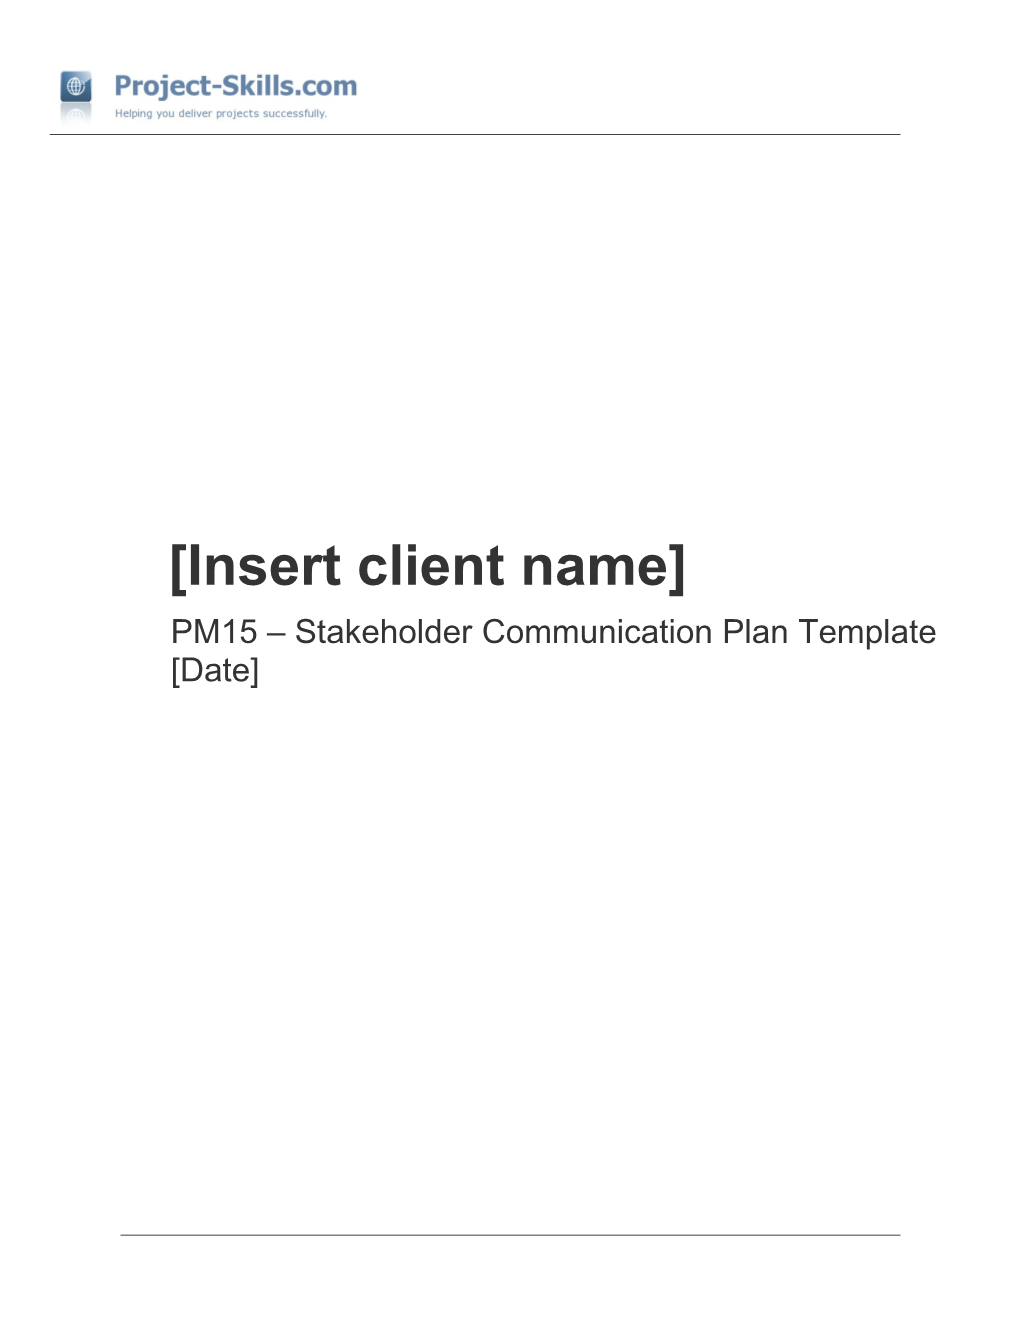 Project Charter Template s4